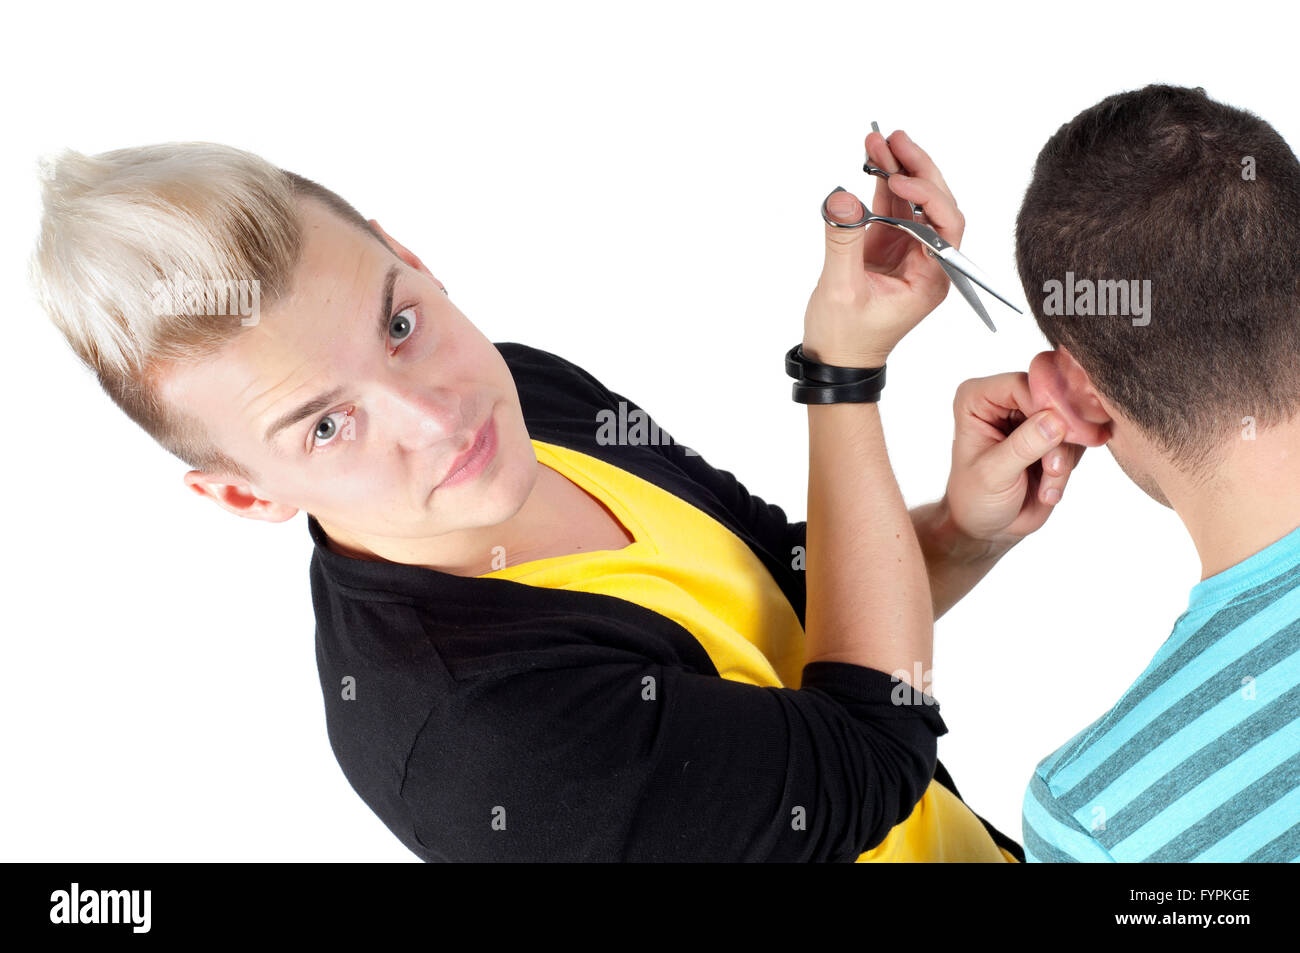 Hairdresser working with scissors Stock Photo